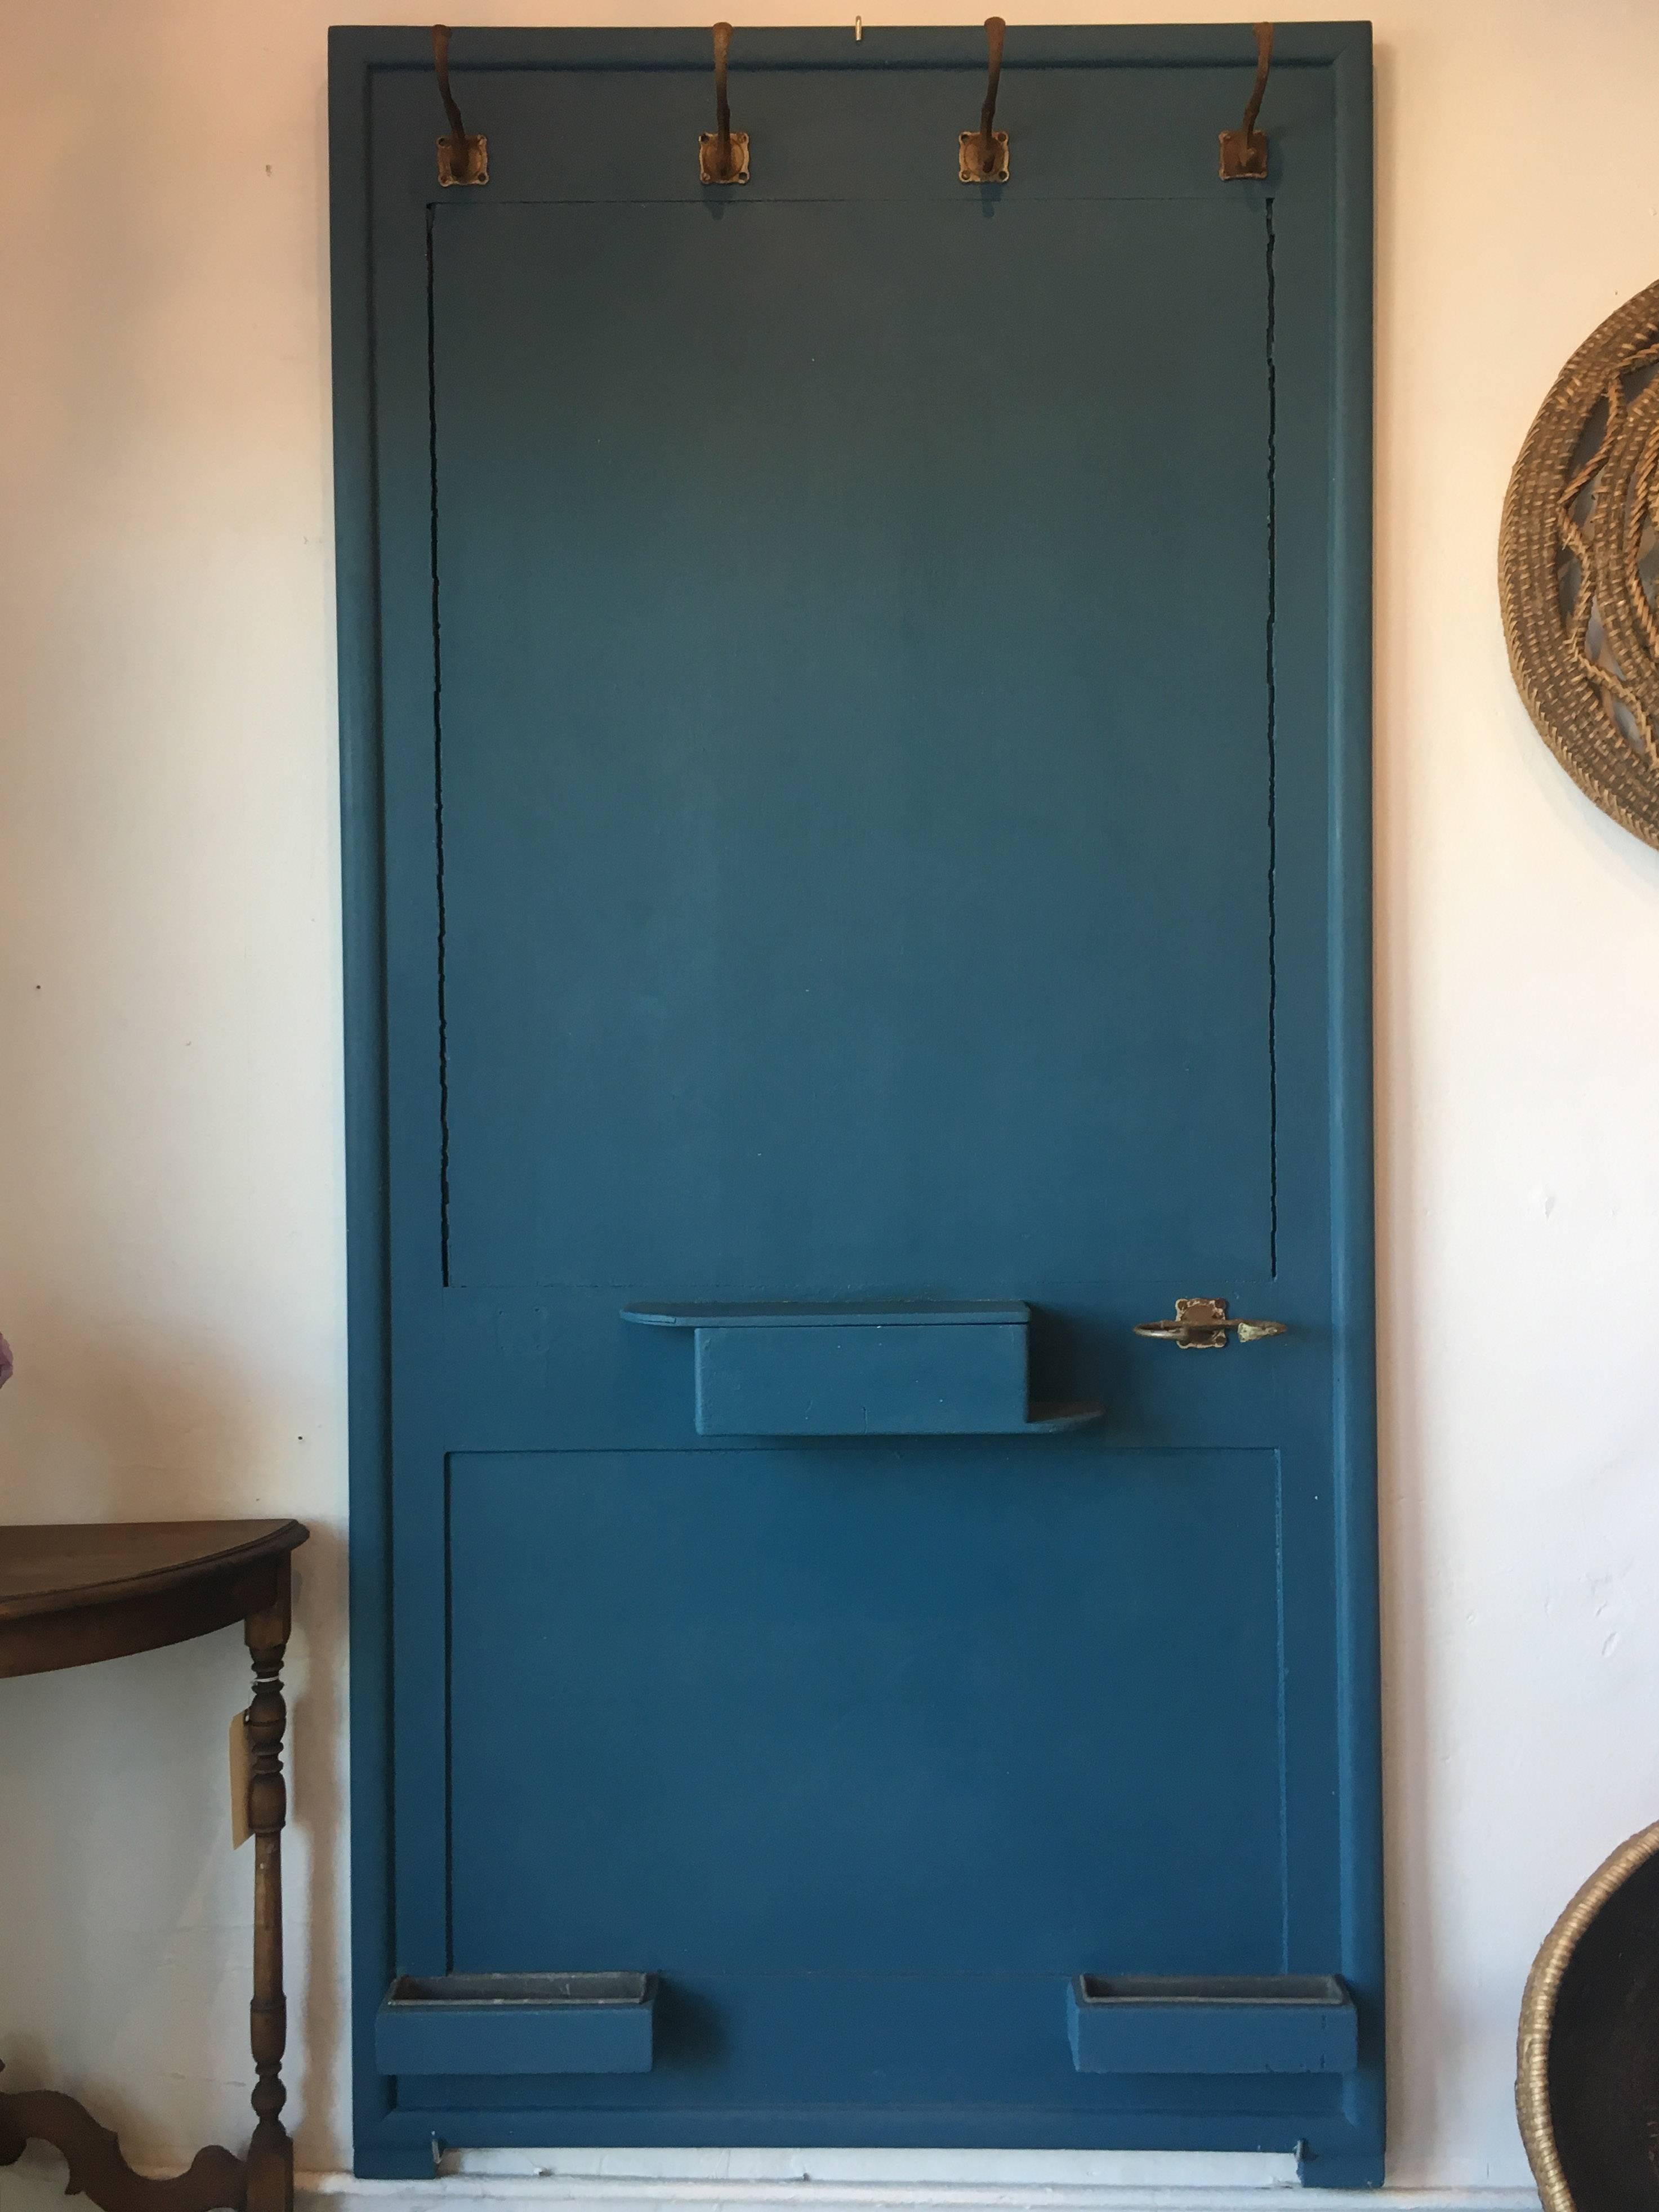 Hallway rack made from a vintage European door. Four hooks along the top, a small shelf and a hook beside it, and two smaller compartments along the bottom. Painted beautiful peacock blue teal color.